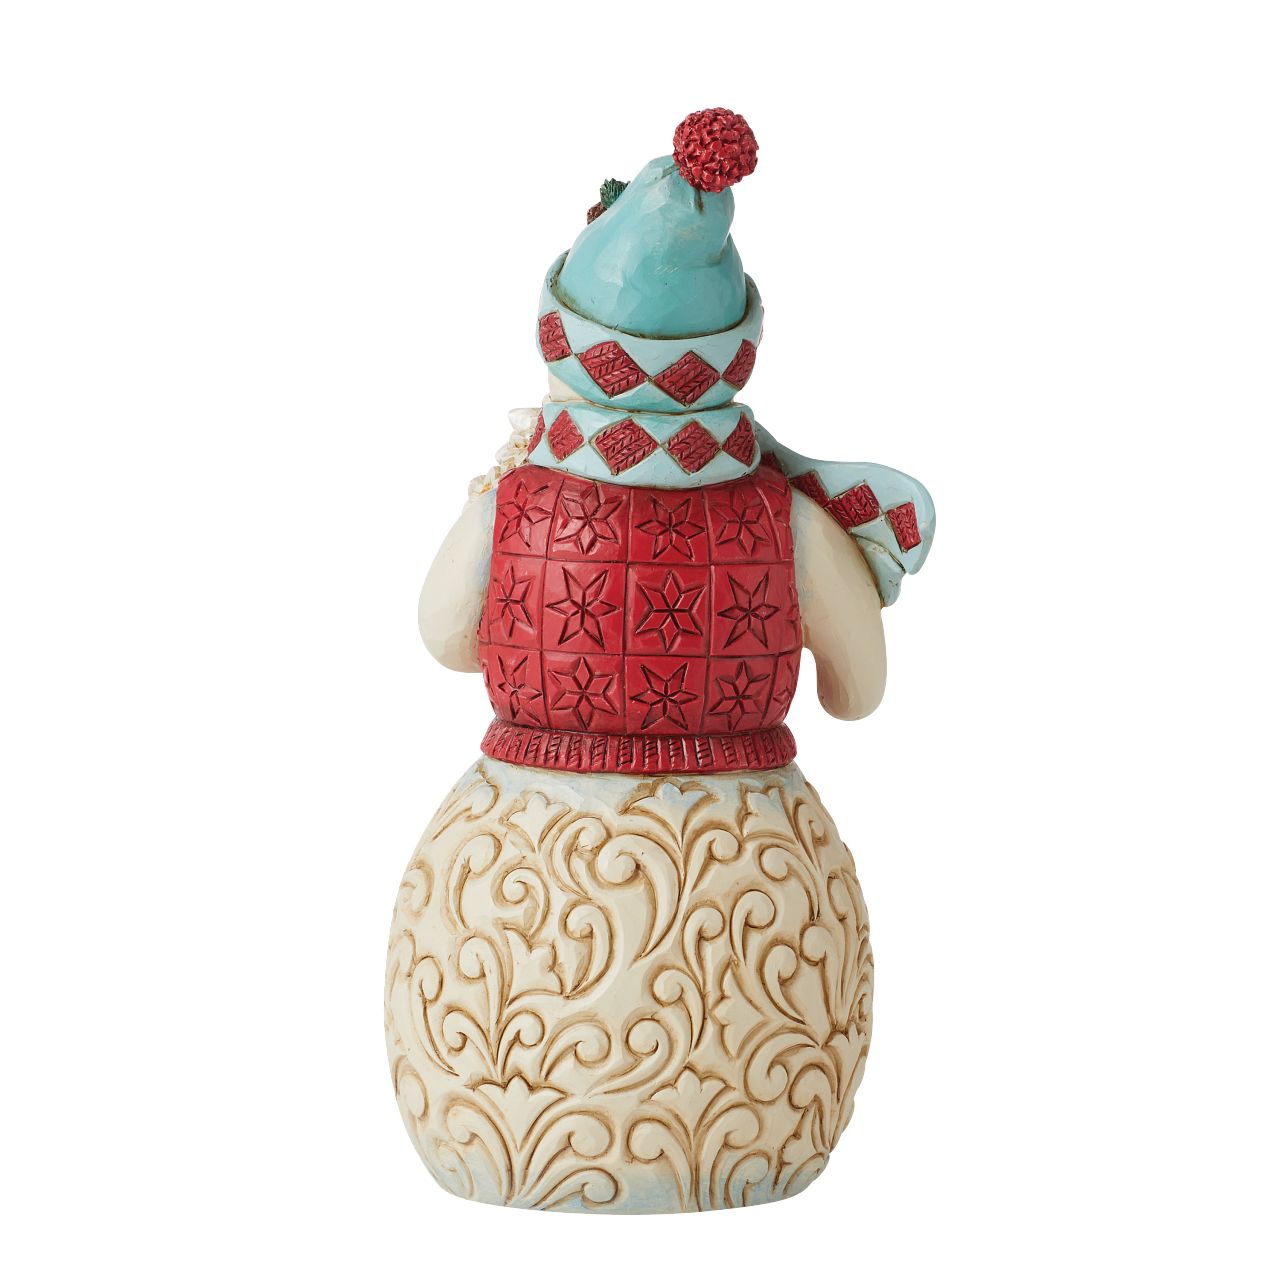 Winter Wonderland Collection Snowman with Sledding Scene Figurine  Winter Wonderland Collection; Bright jewel tones, metallic shimmering and pearlized finishes and coloured glitter accents. This beautiful glittering Snowman has a delightful scene on his belly and will brighten any room.